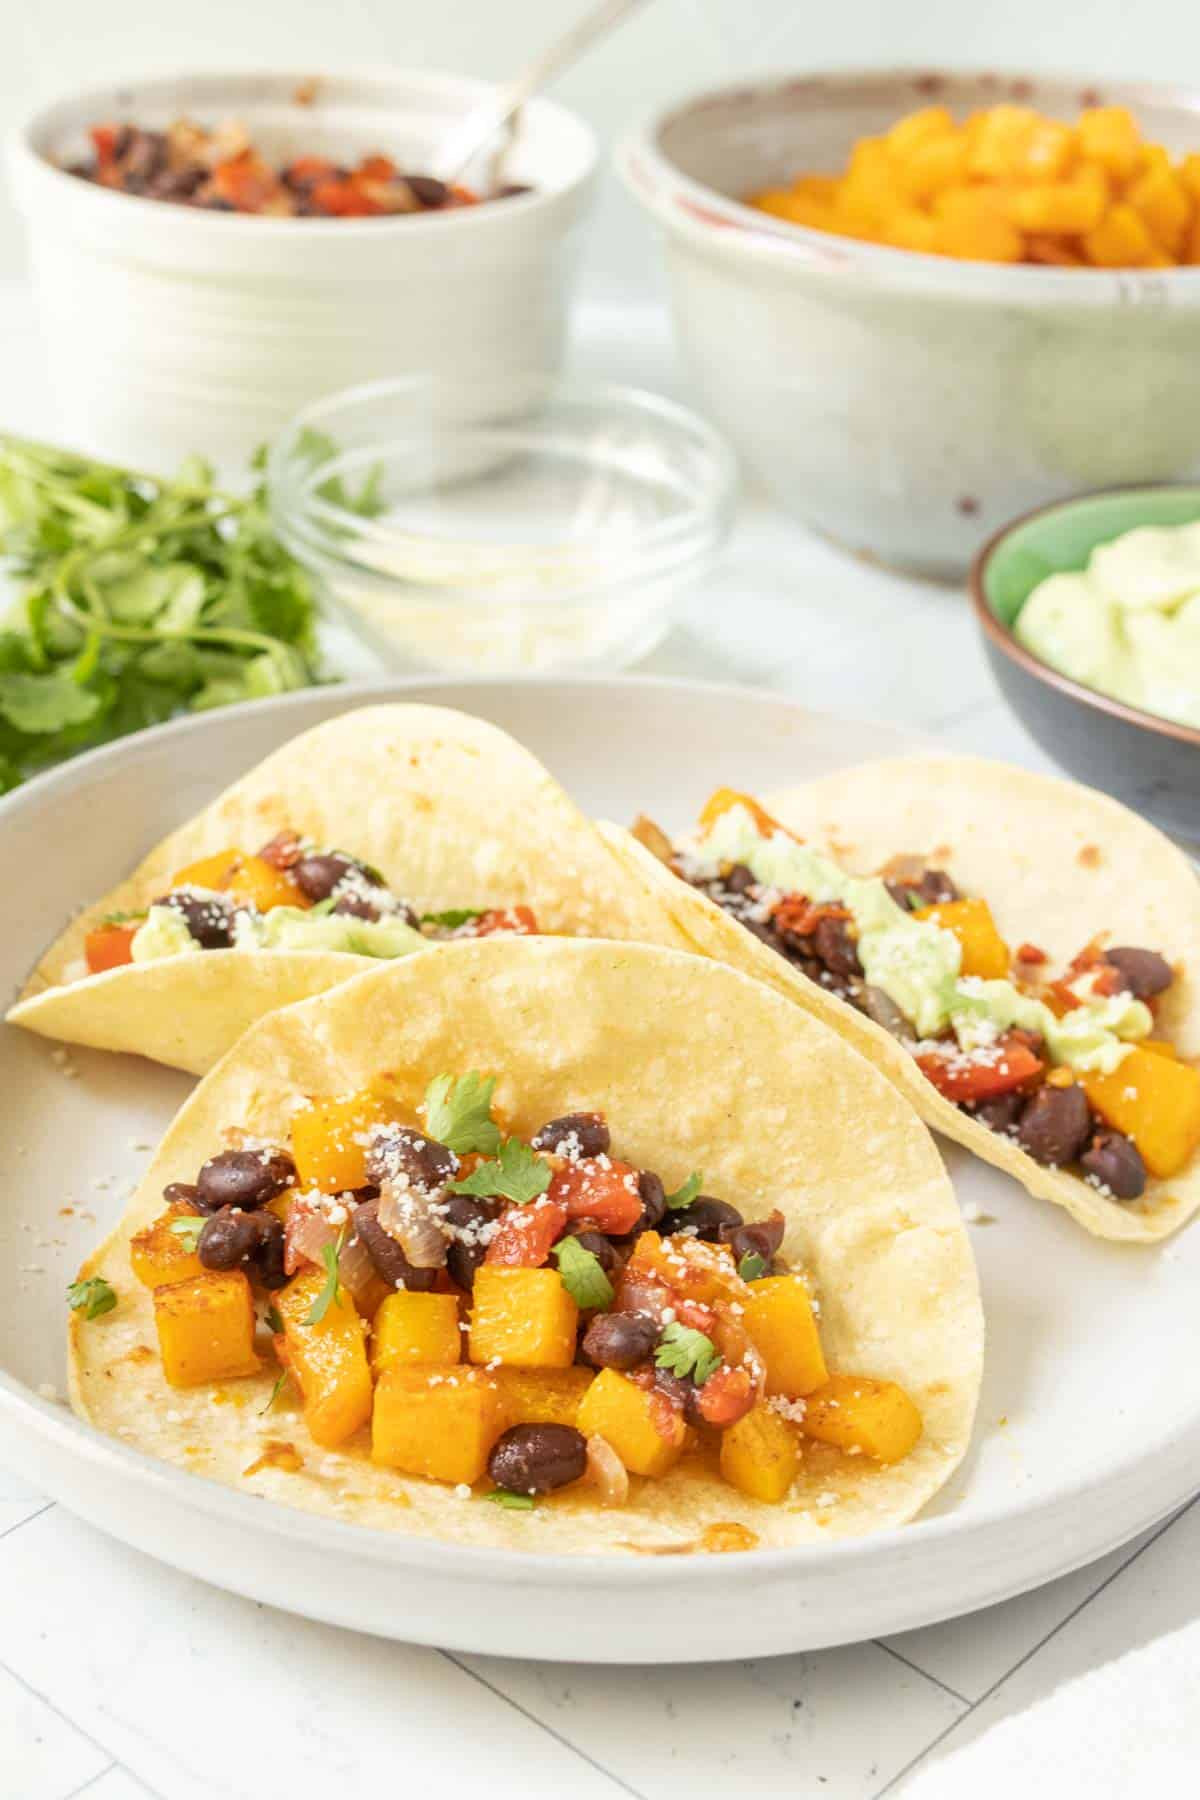 Butternut Squash Tacos with Black Beans